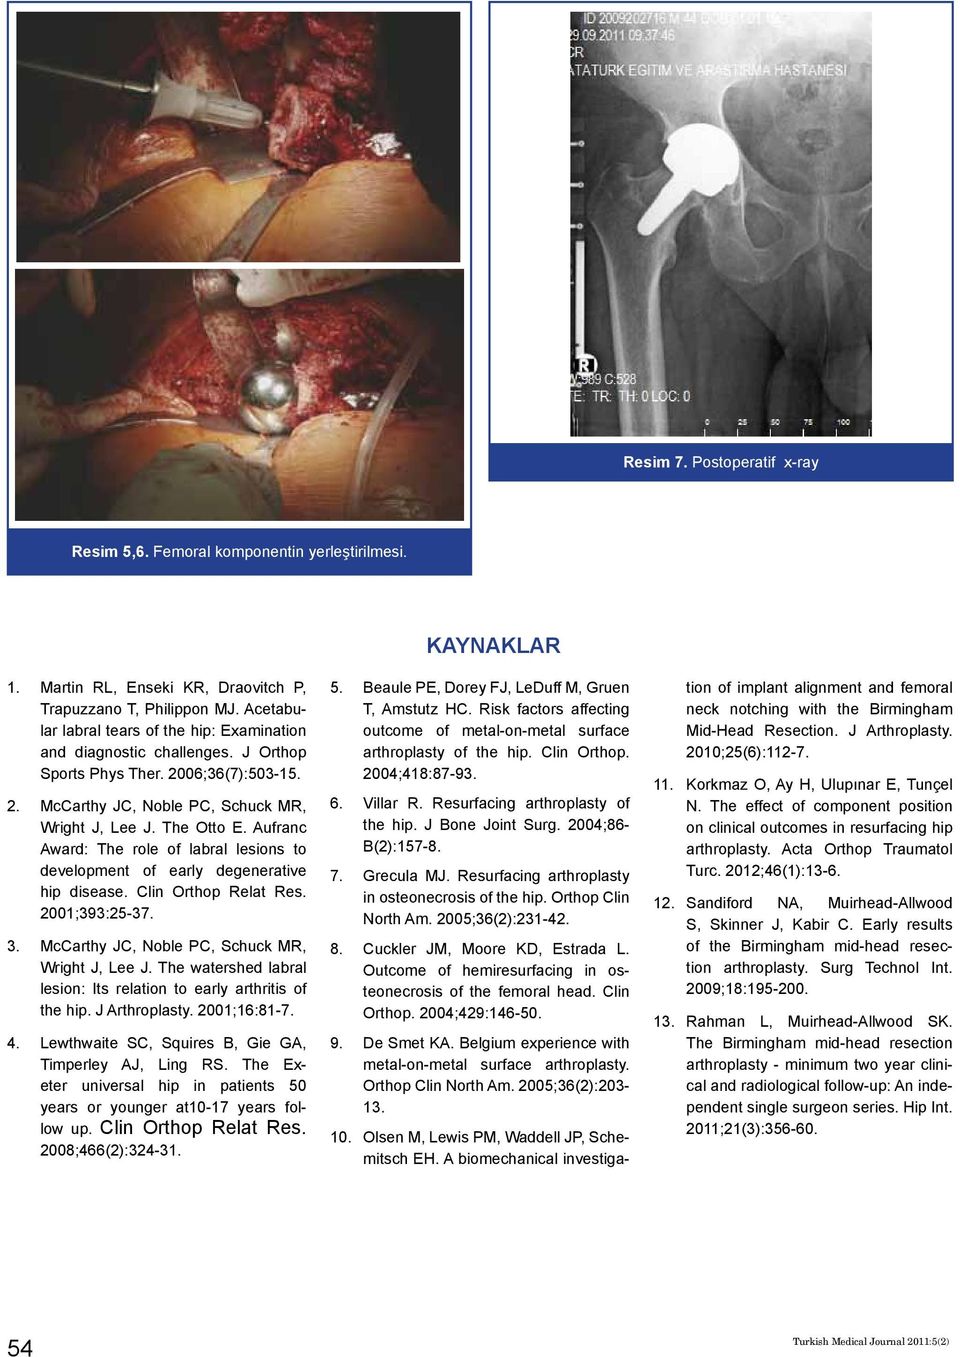 Aufranc Award: The role of labral lesions to development of early degenerative hip disease. Clin Orthop Relat Res. 2001;393:25-37. 3. McCarthy JC, Noble PC, Schuck MR, Wright J, Lee J.